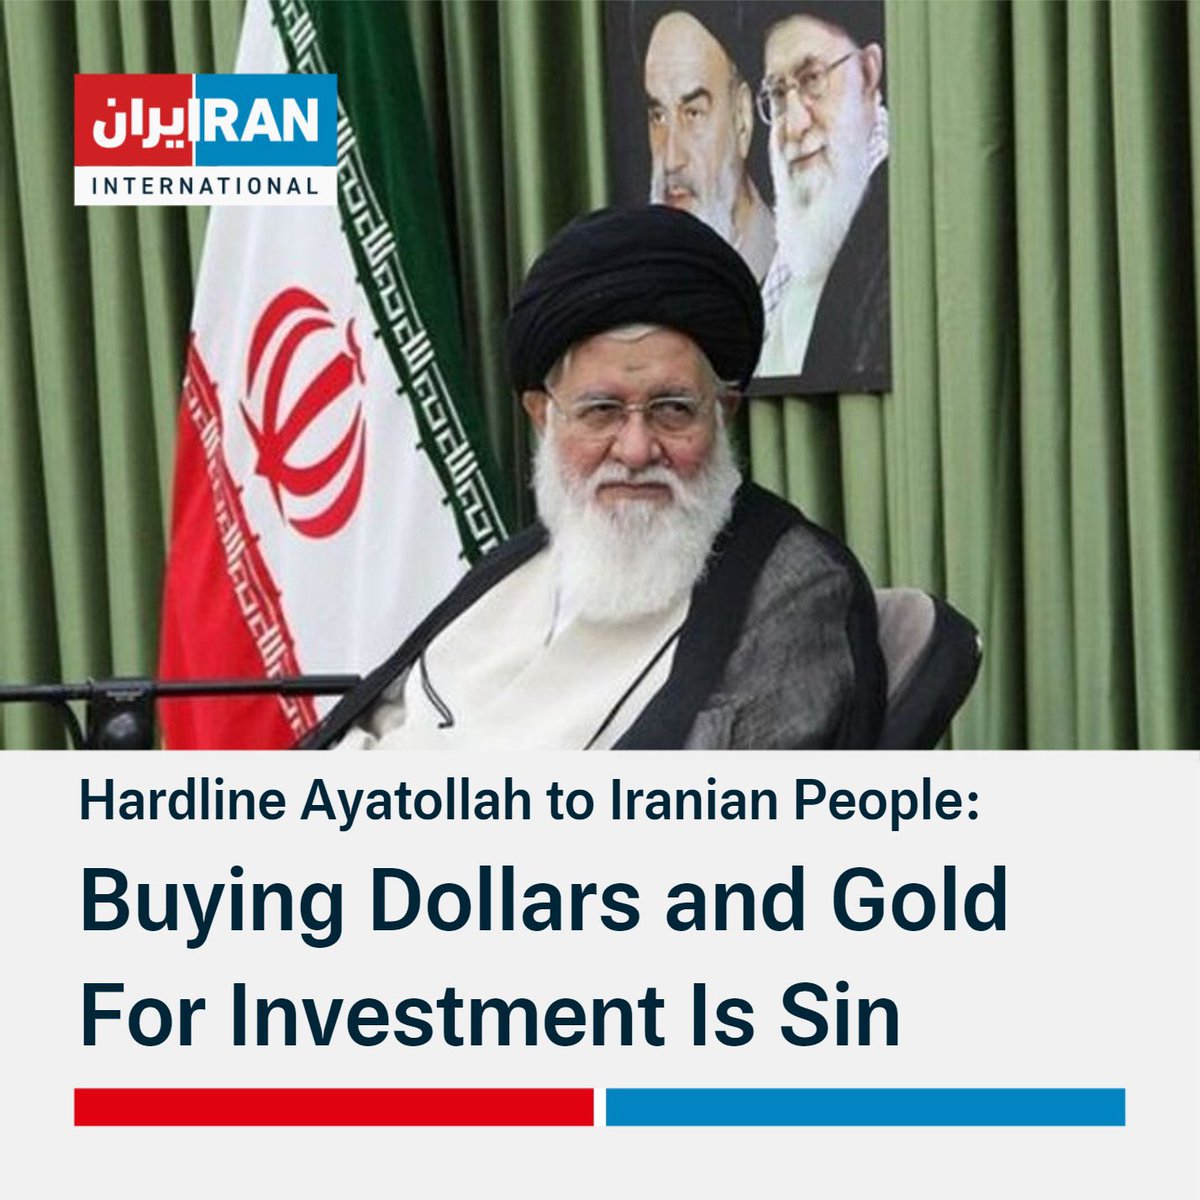 Another prime example of using the name of religion for your own interests.

As the Iranian Rial is plummeting, the Iranian people are exchanging their IRR (Iranian Rial) to dollars, euros or gold.
Which is further hurting the mullah regime.

#oplran